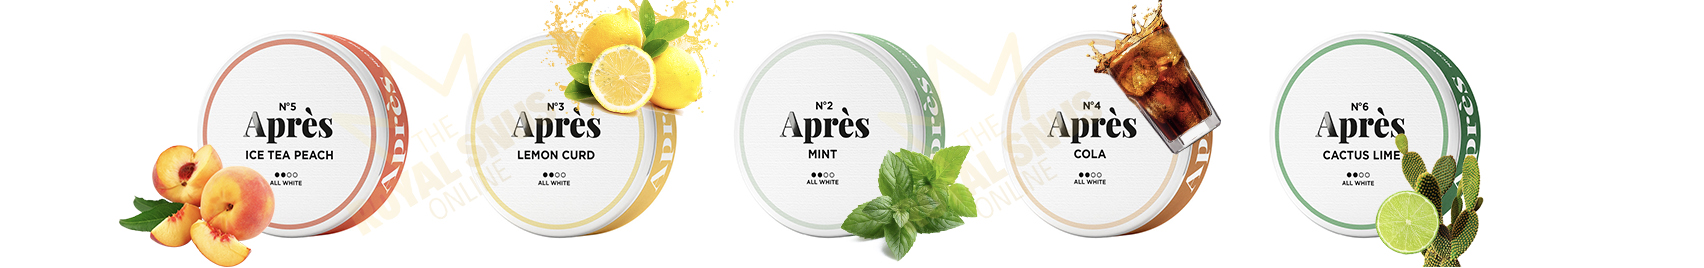 Buy Apres nicotine pouches online at The Royal Snus Online